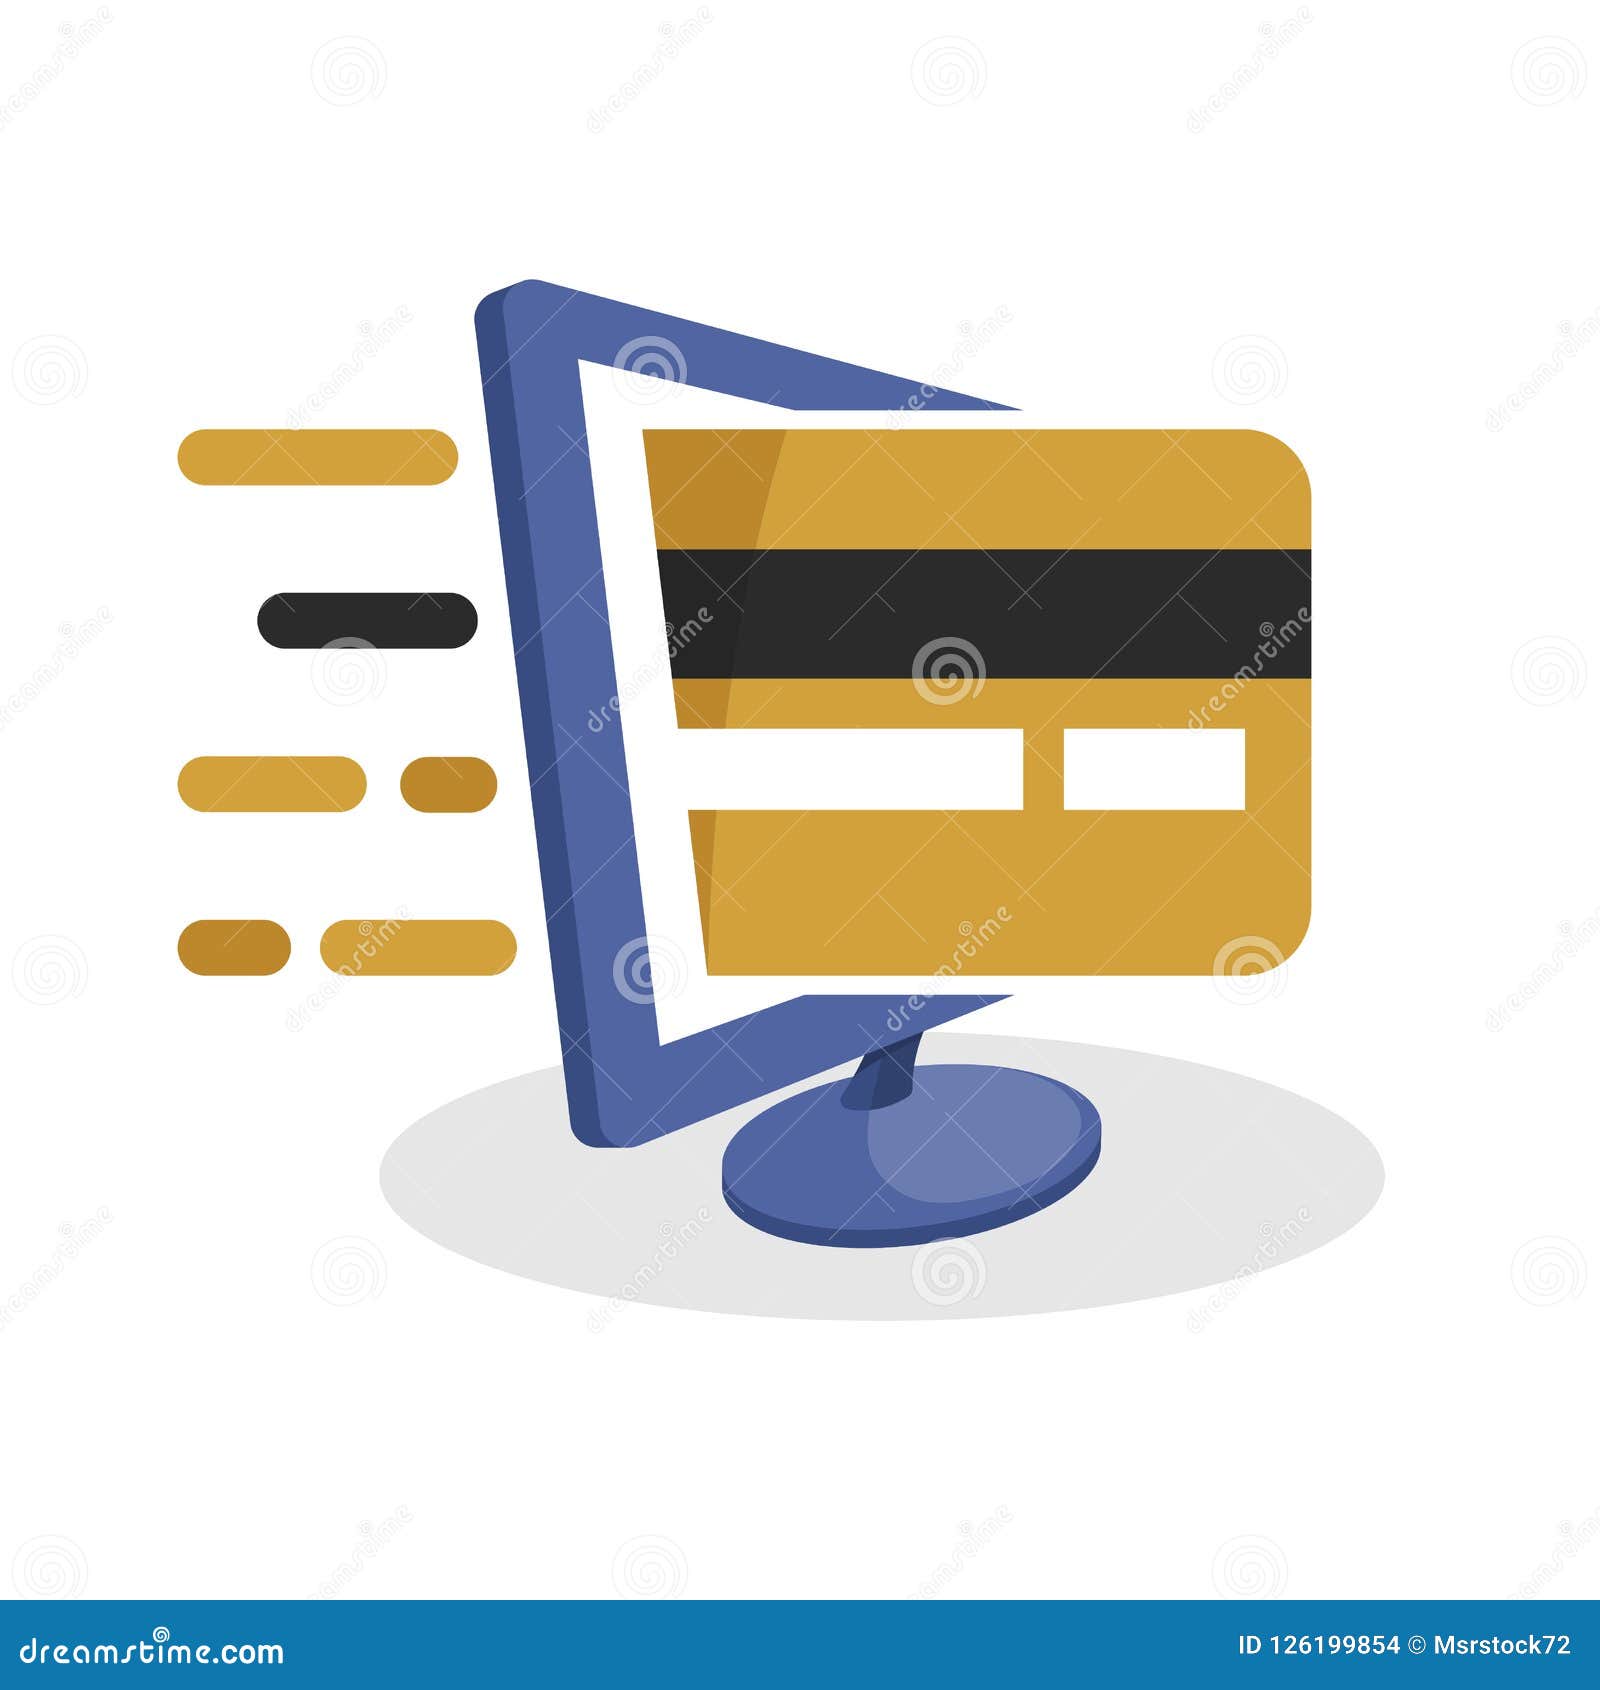  icon  with digital media  about online payment transactions with credit or debit card